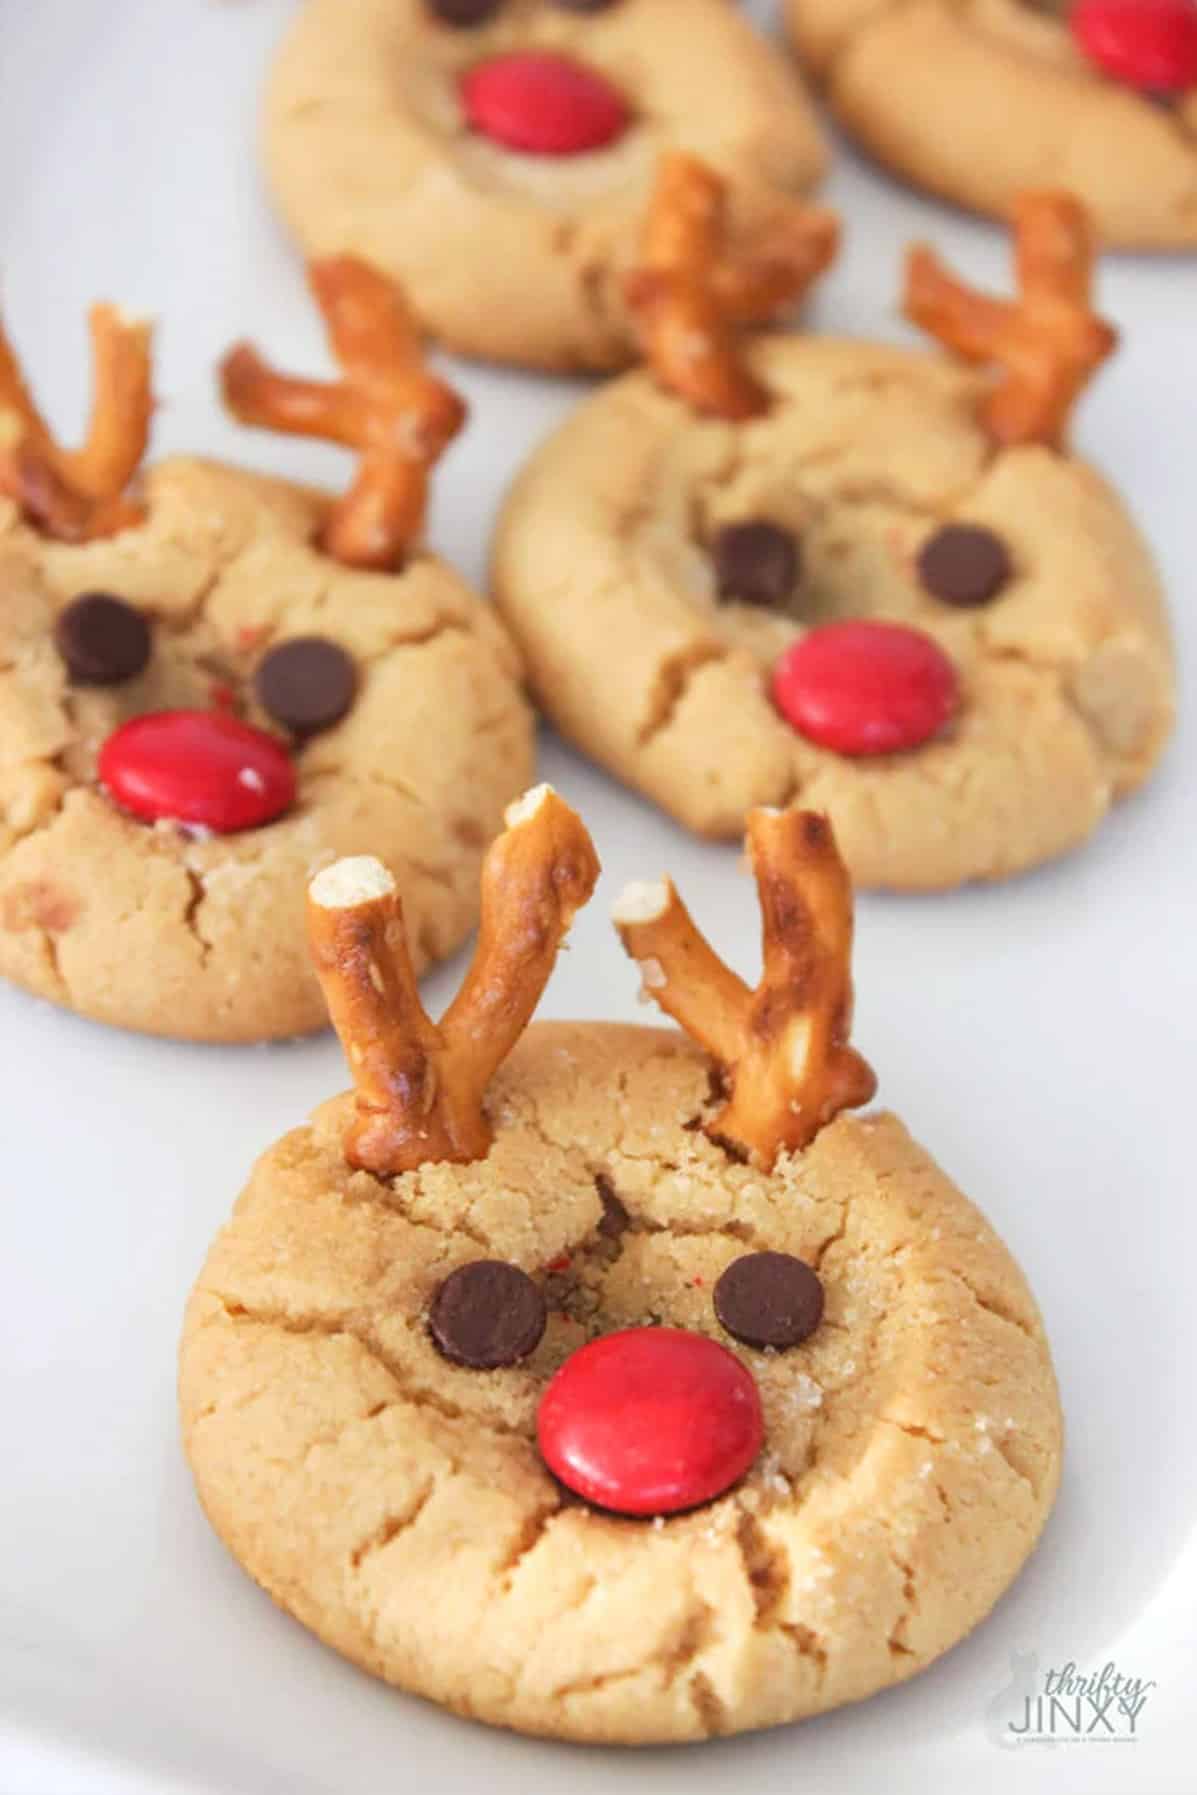 Peanut Butter Cookies made into reindeer faces on a white surface.